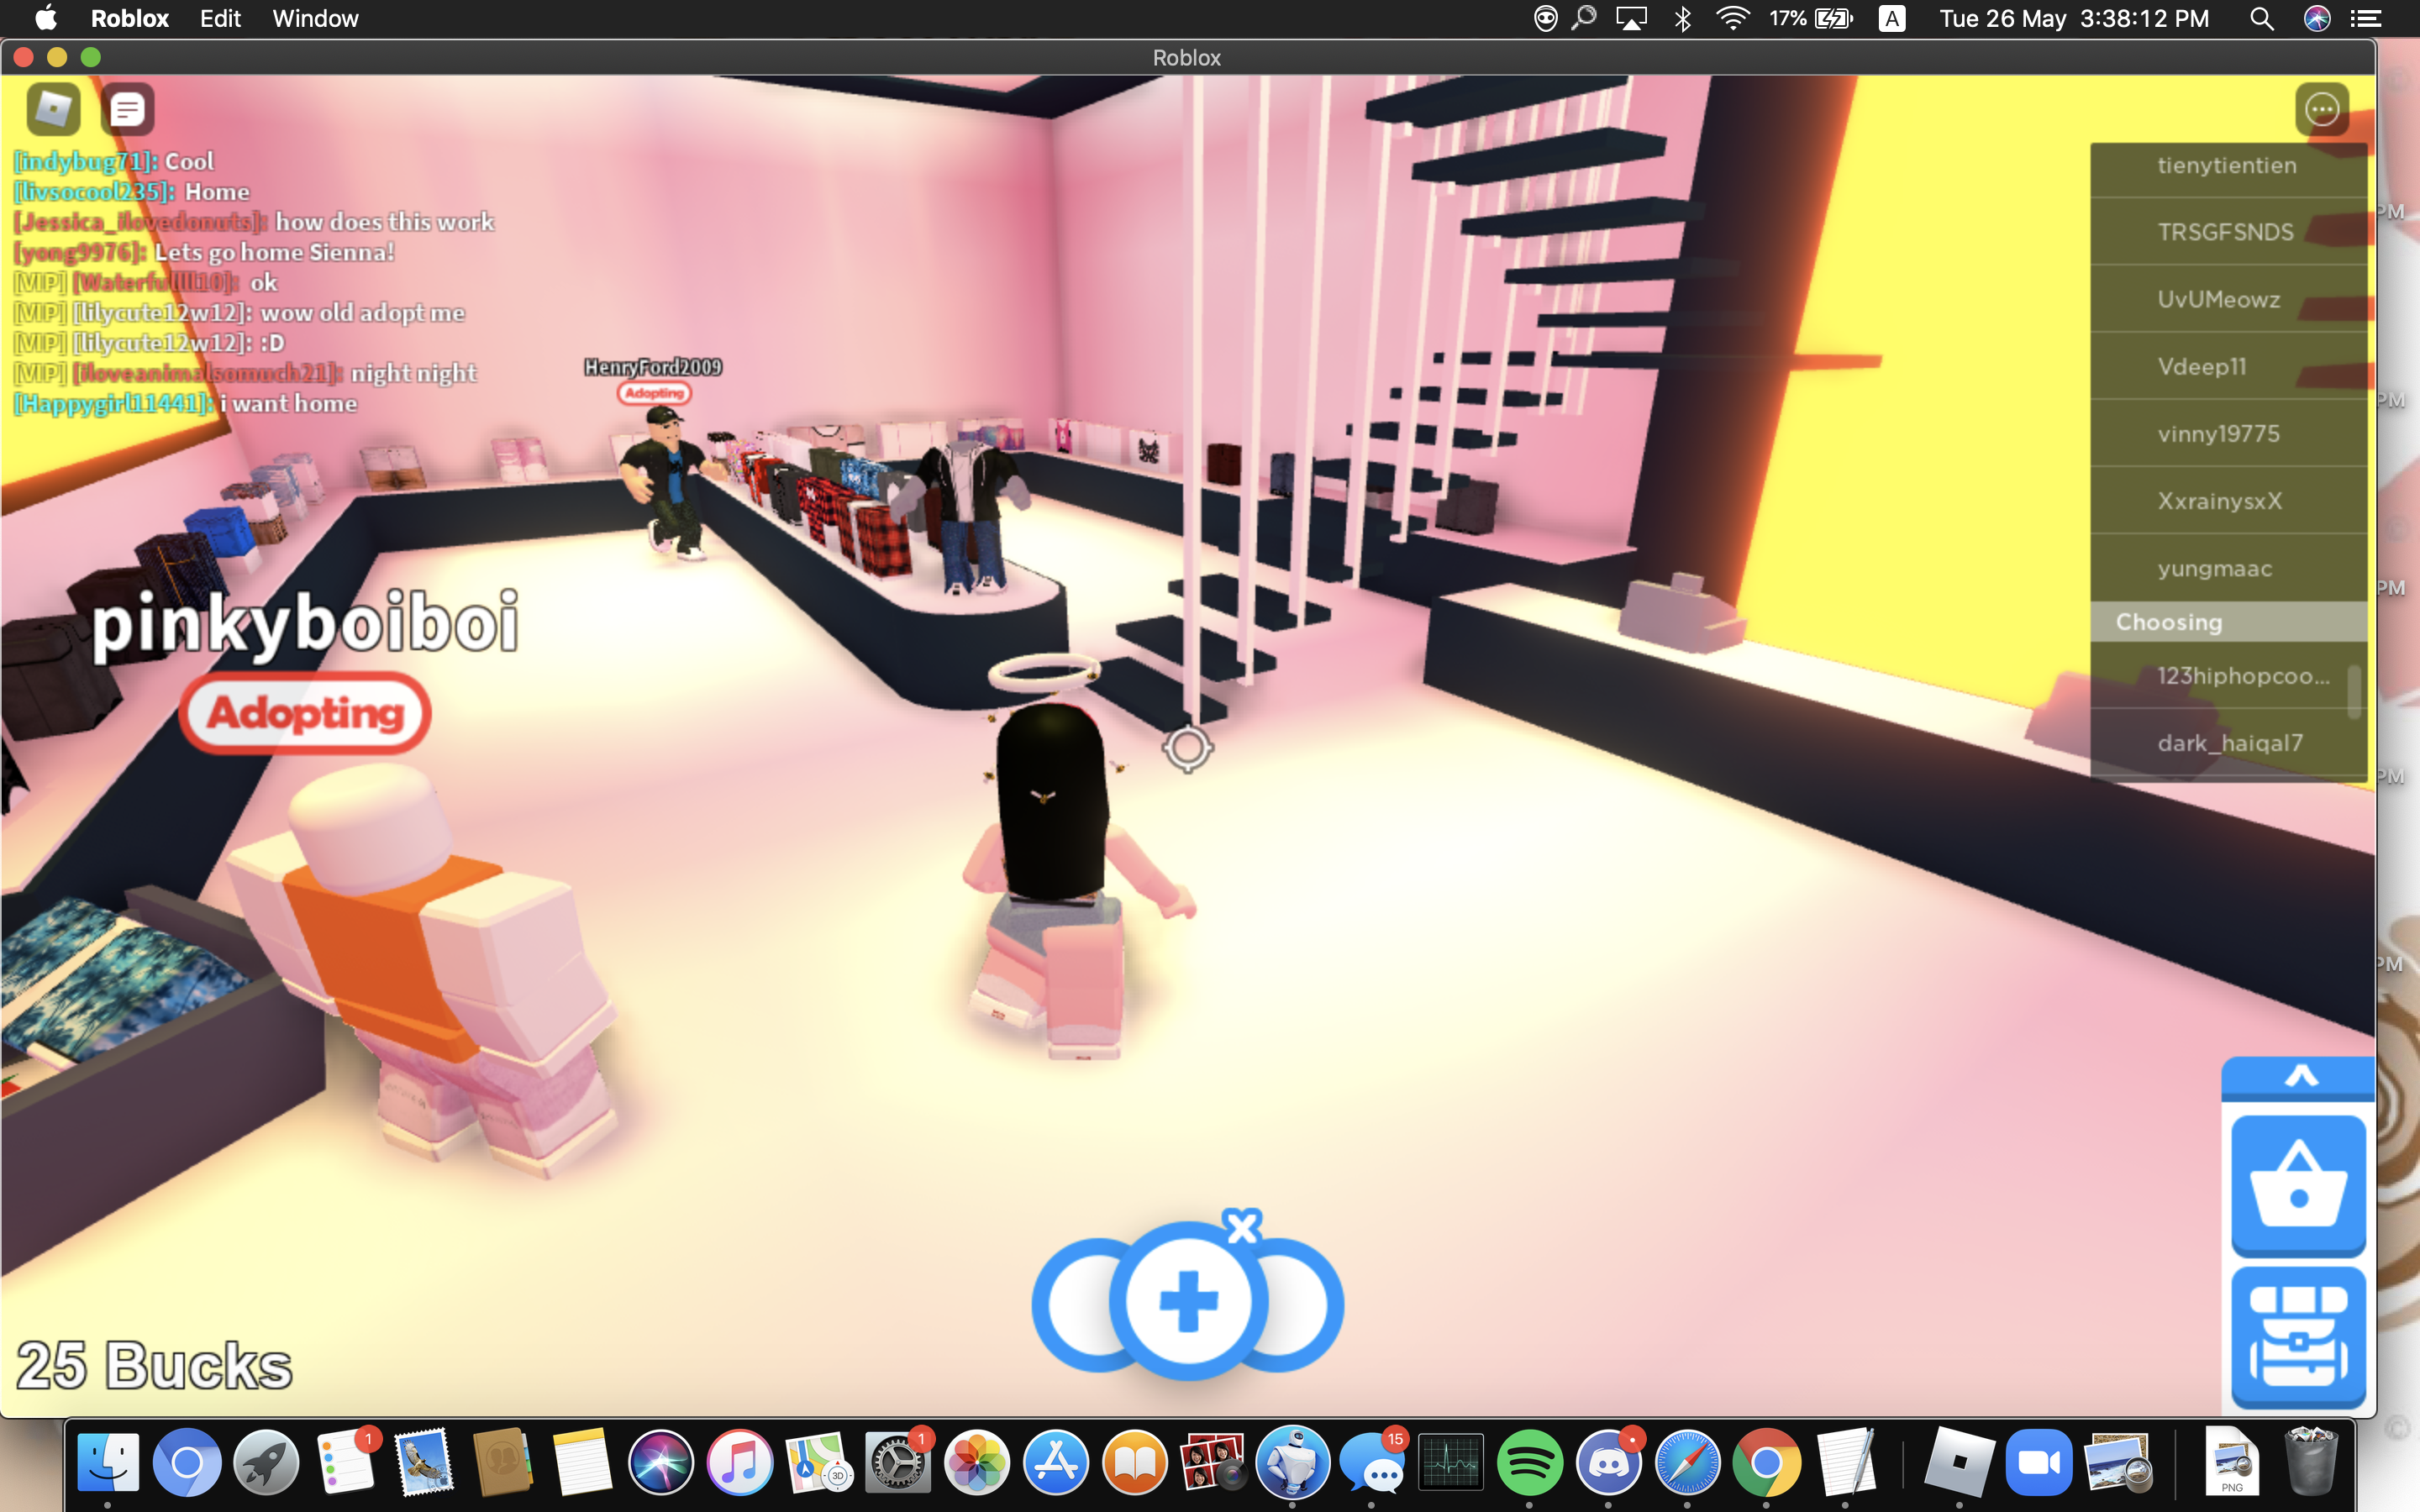 Went And Played Adopt Me Legacy D Link Below Fandom - https web roblox com p